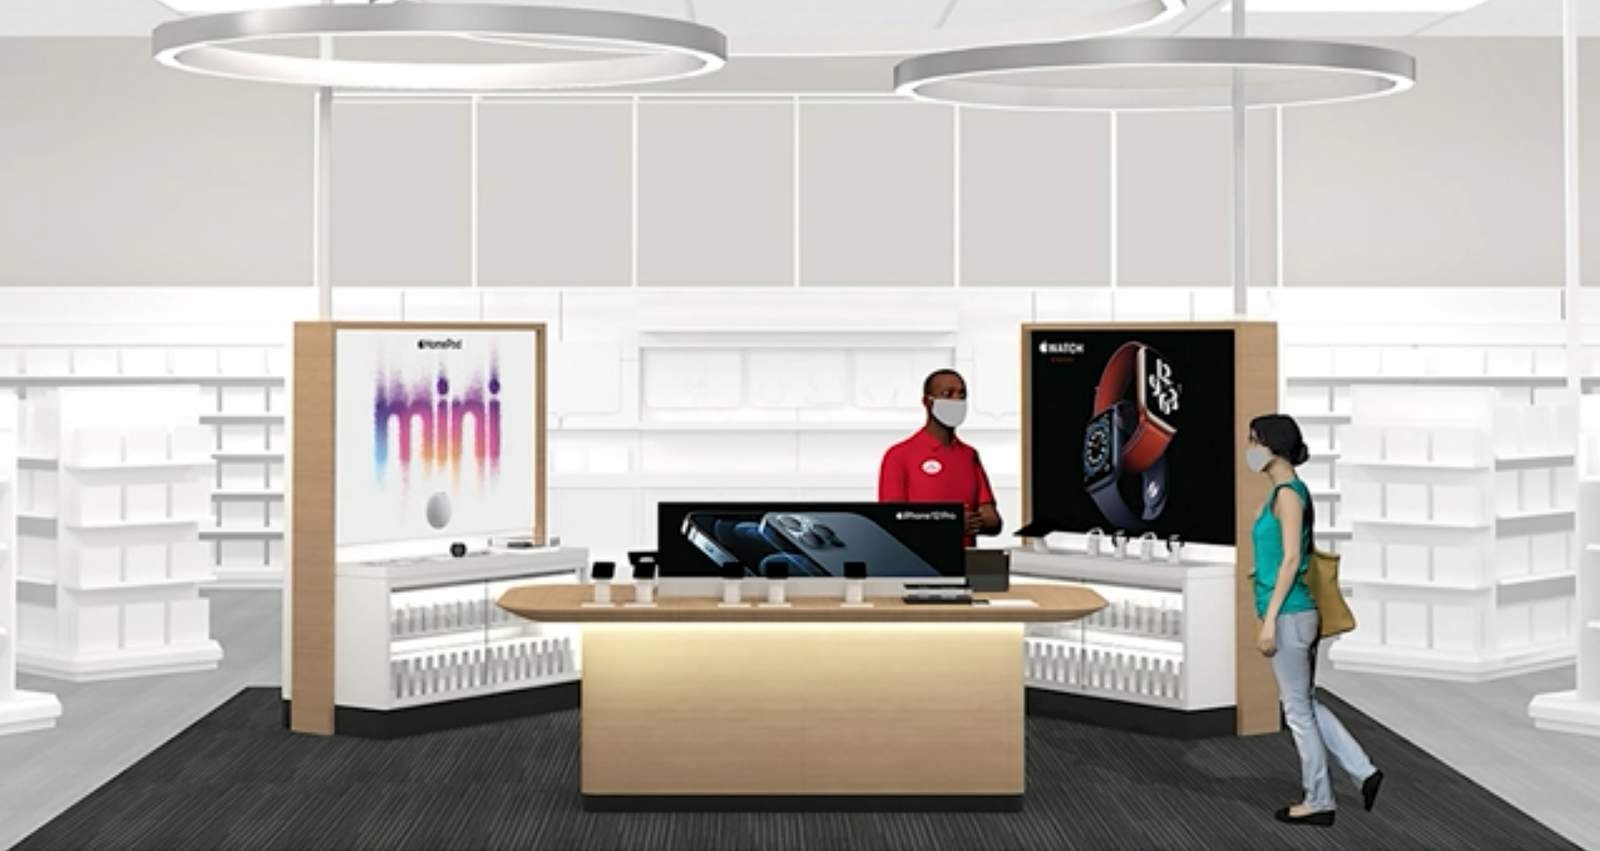 Target to open mini Apple shops in some stores